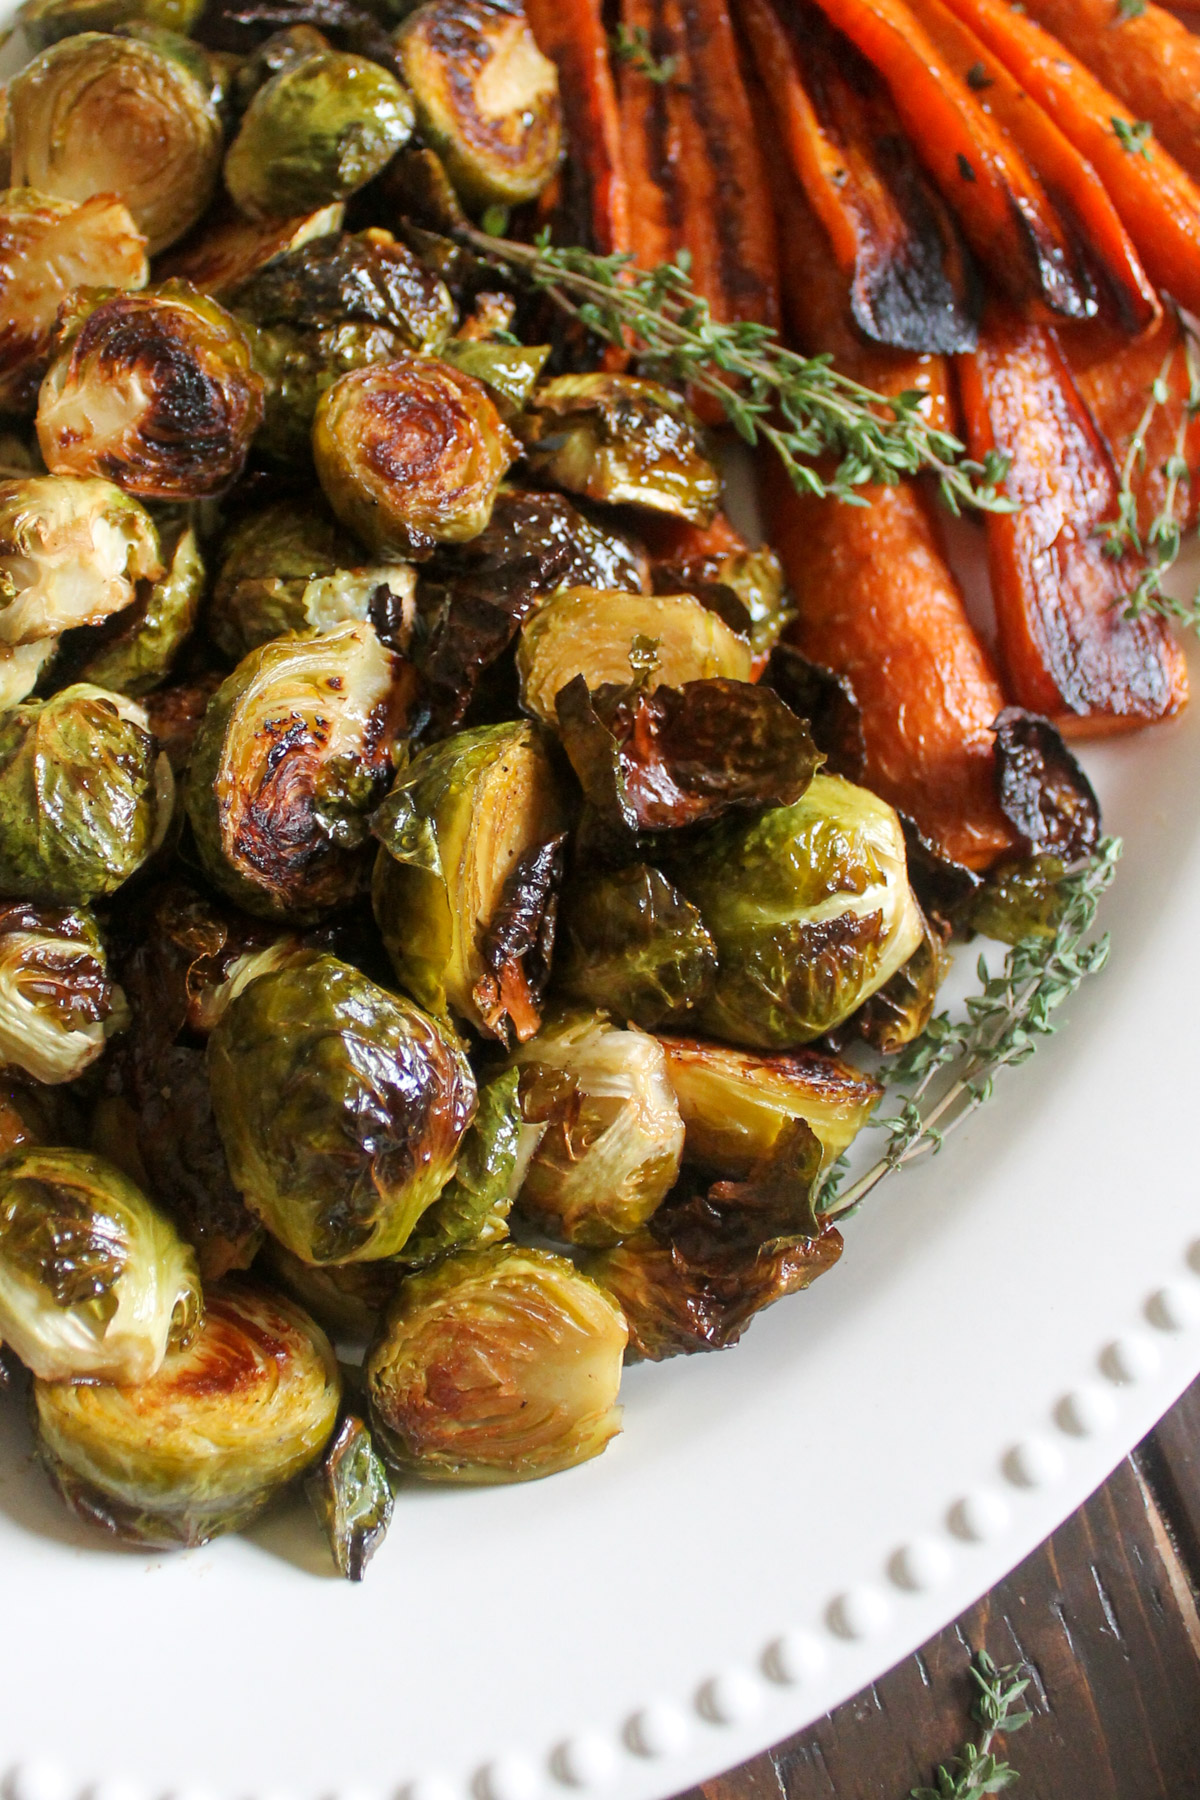 Roasted Brussel sprouts and carrots with balsamic vinegar and honey.